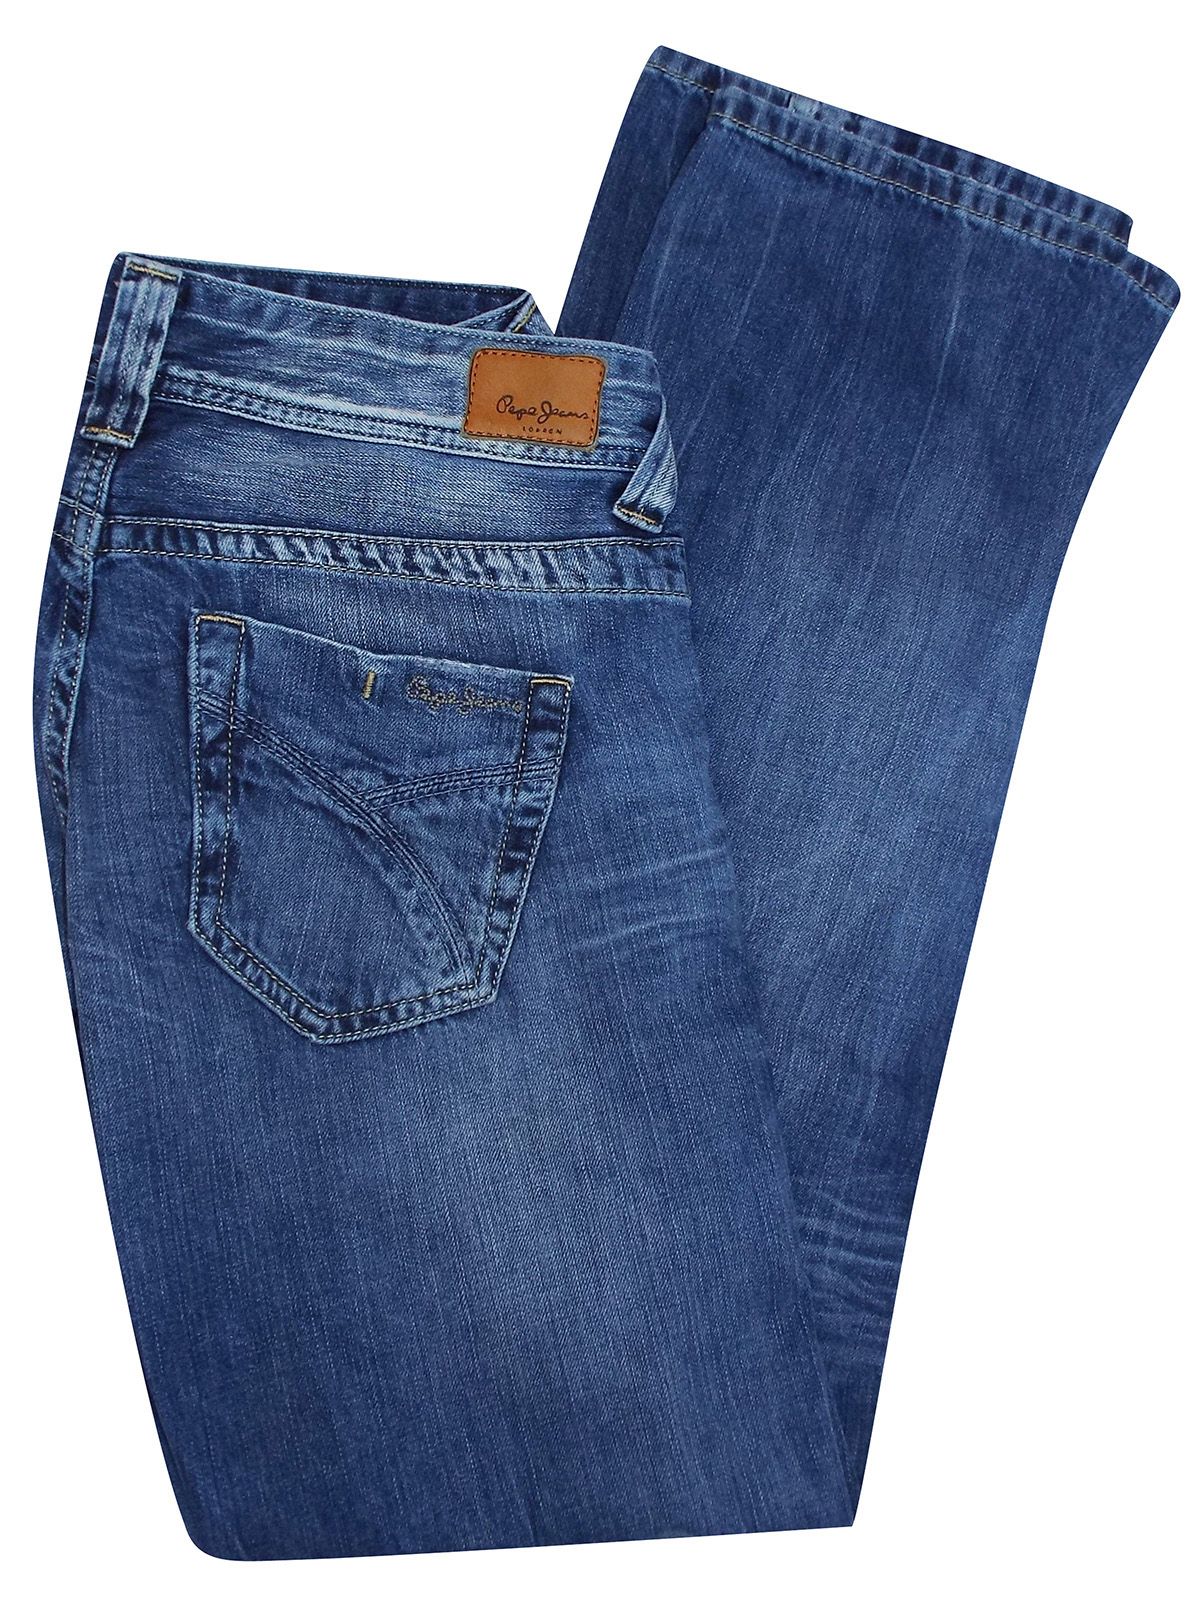 Pepe Jeans - - Pepe Jeans OLYMPIA Denim Wash Comfort Fit Jeans - Waist ...